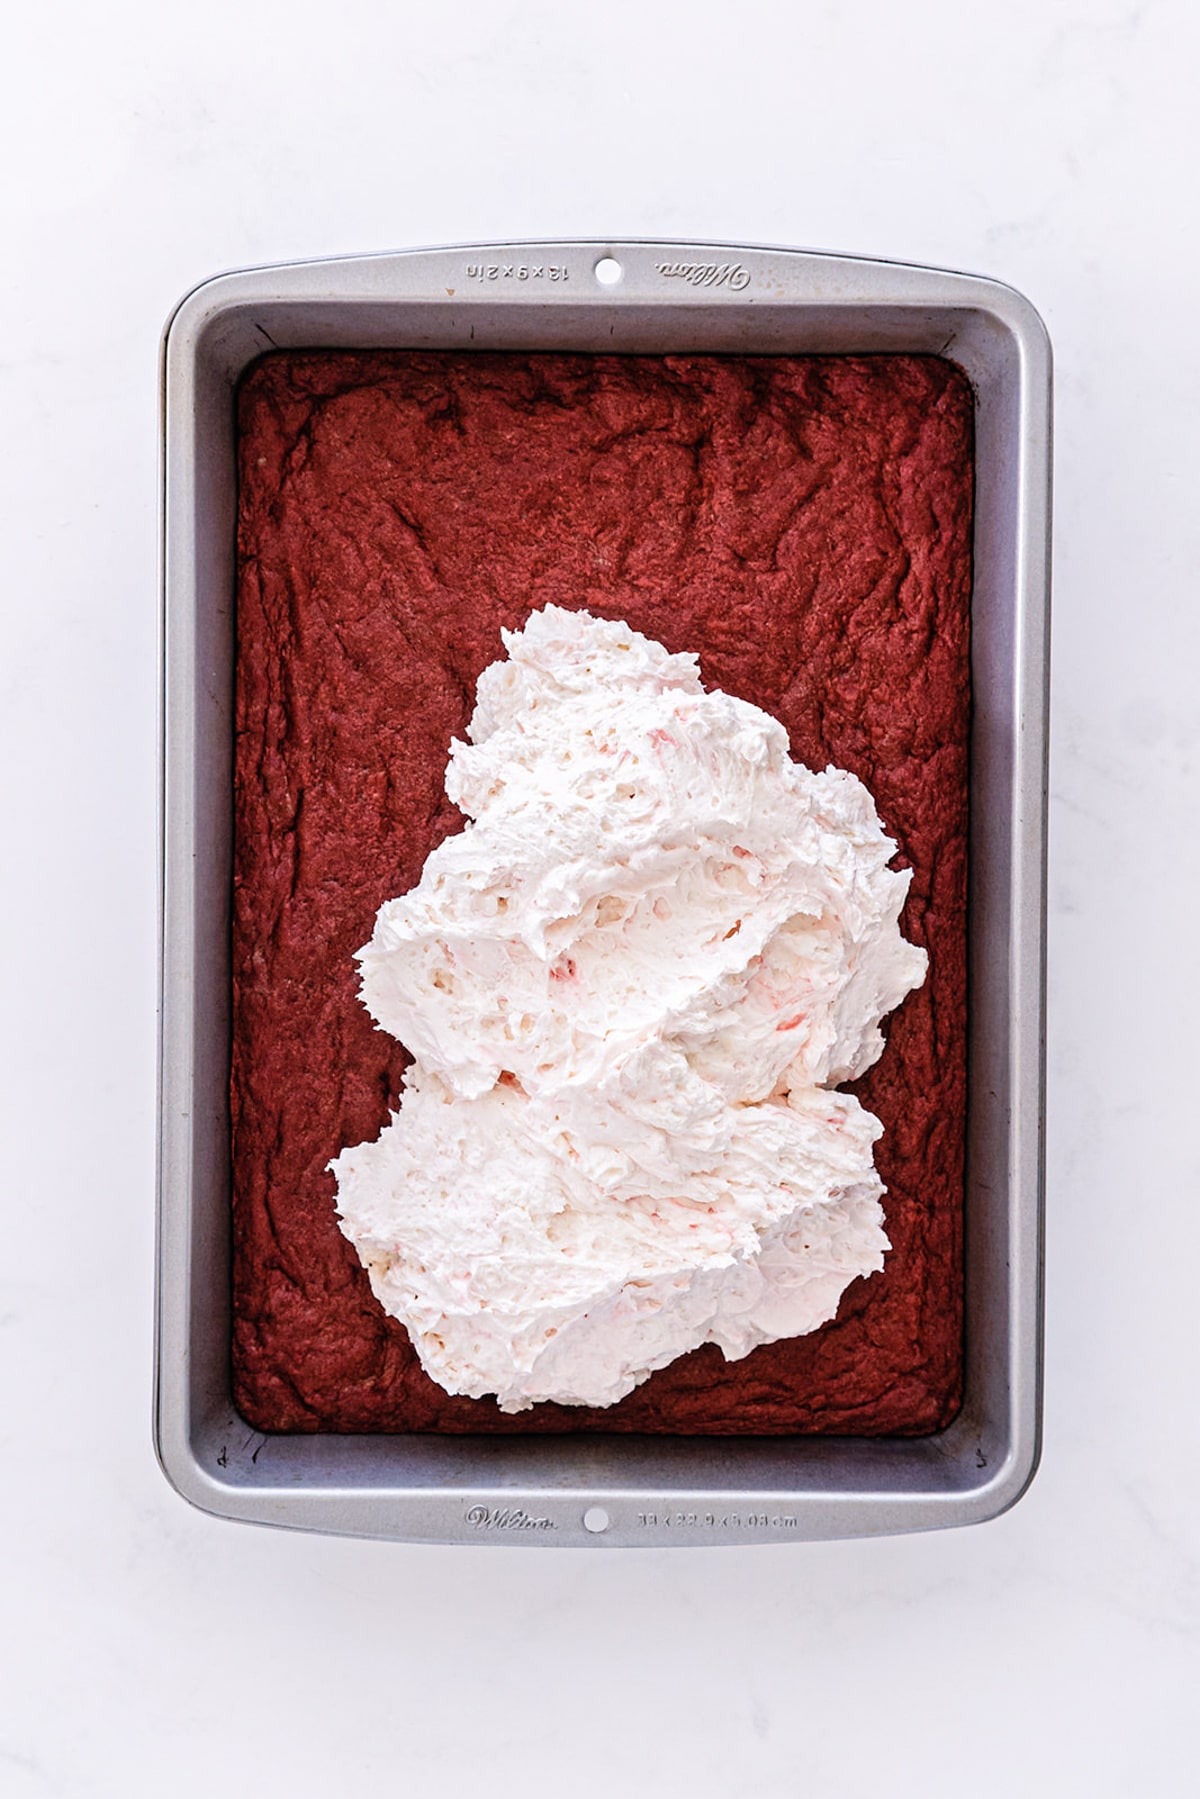 red velvet layer with cheesecake spread on top